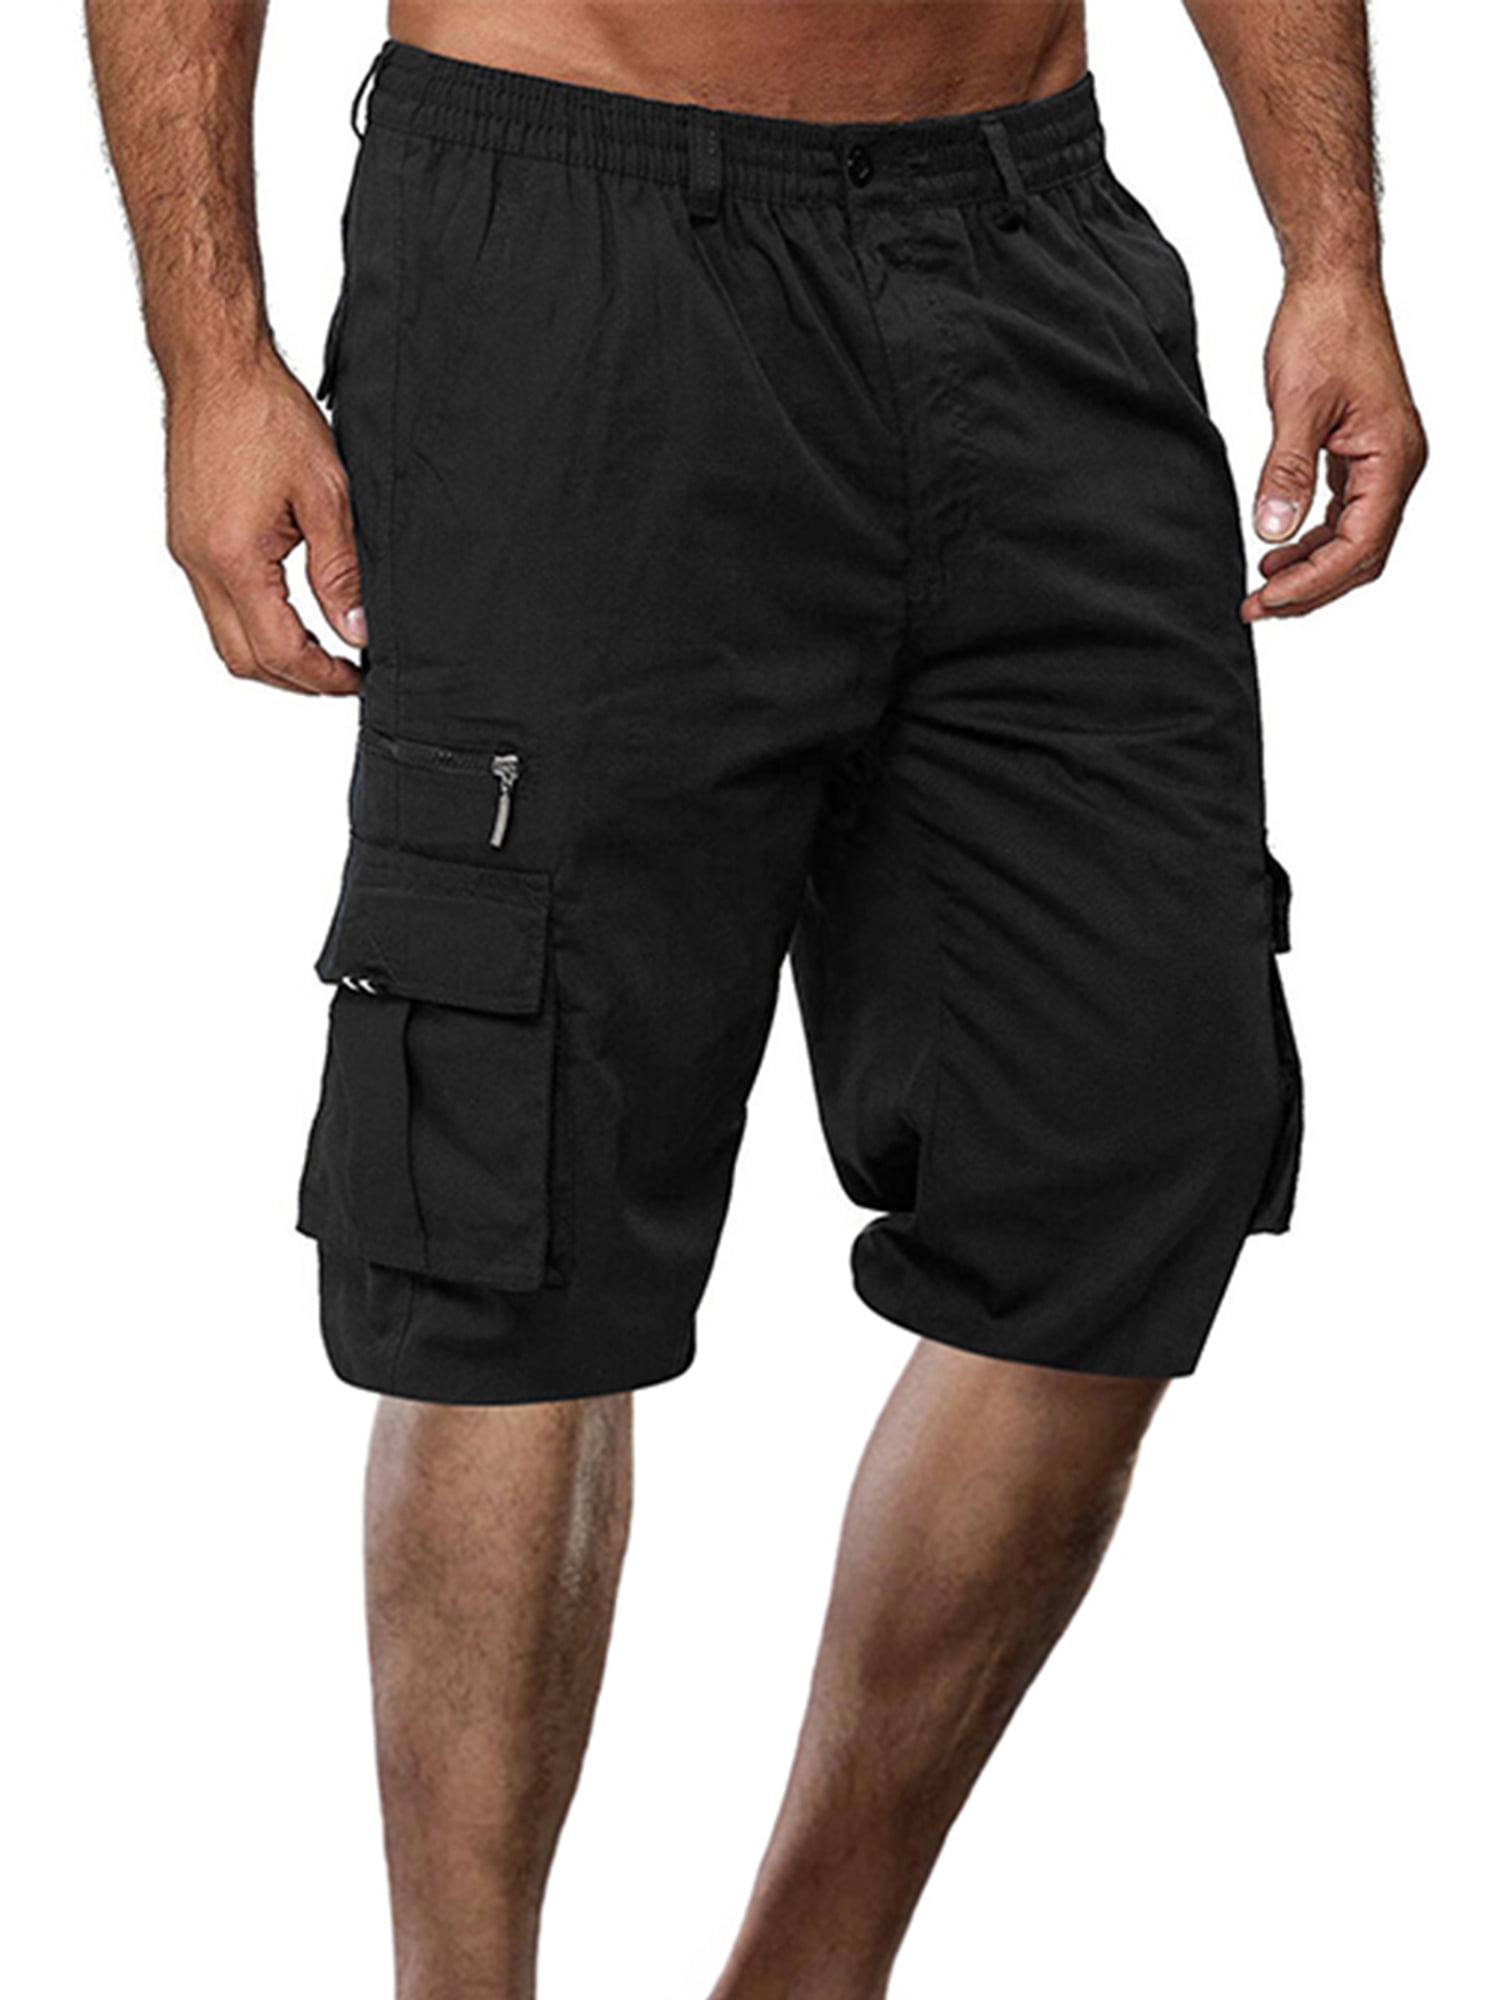 Corna Men's Cargo Shorts Relaxed Fit with Multi Pockets Lightweight Outdoor Casual Short 